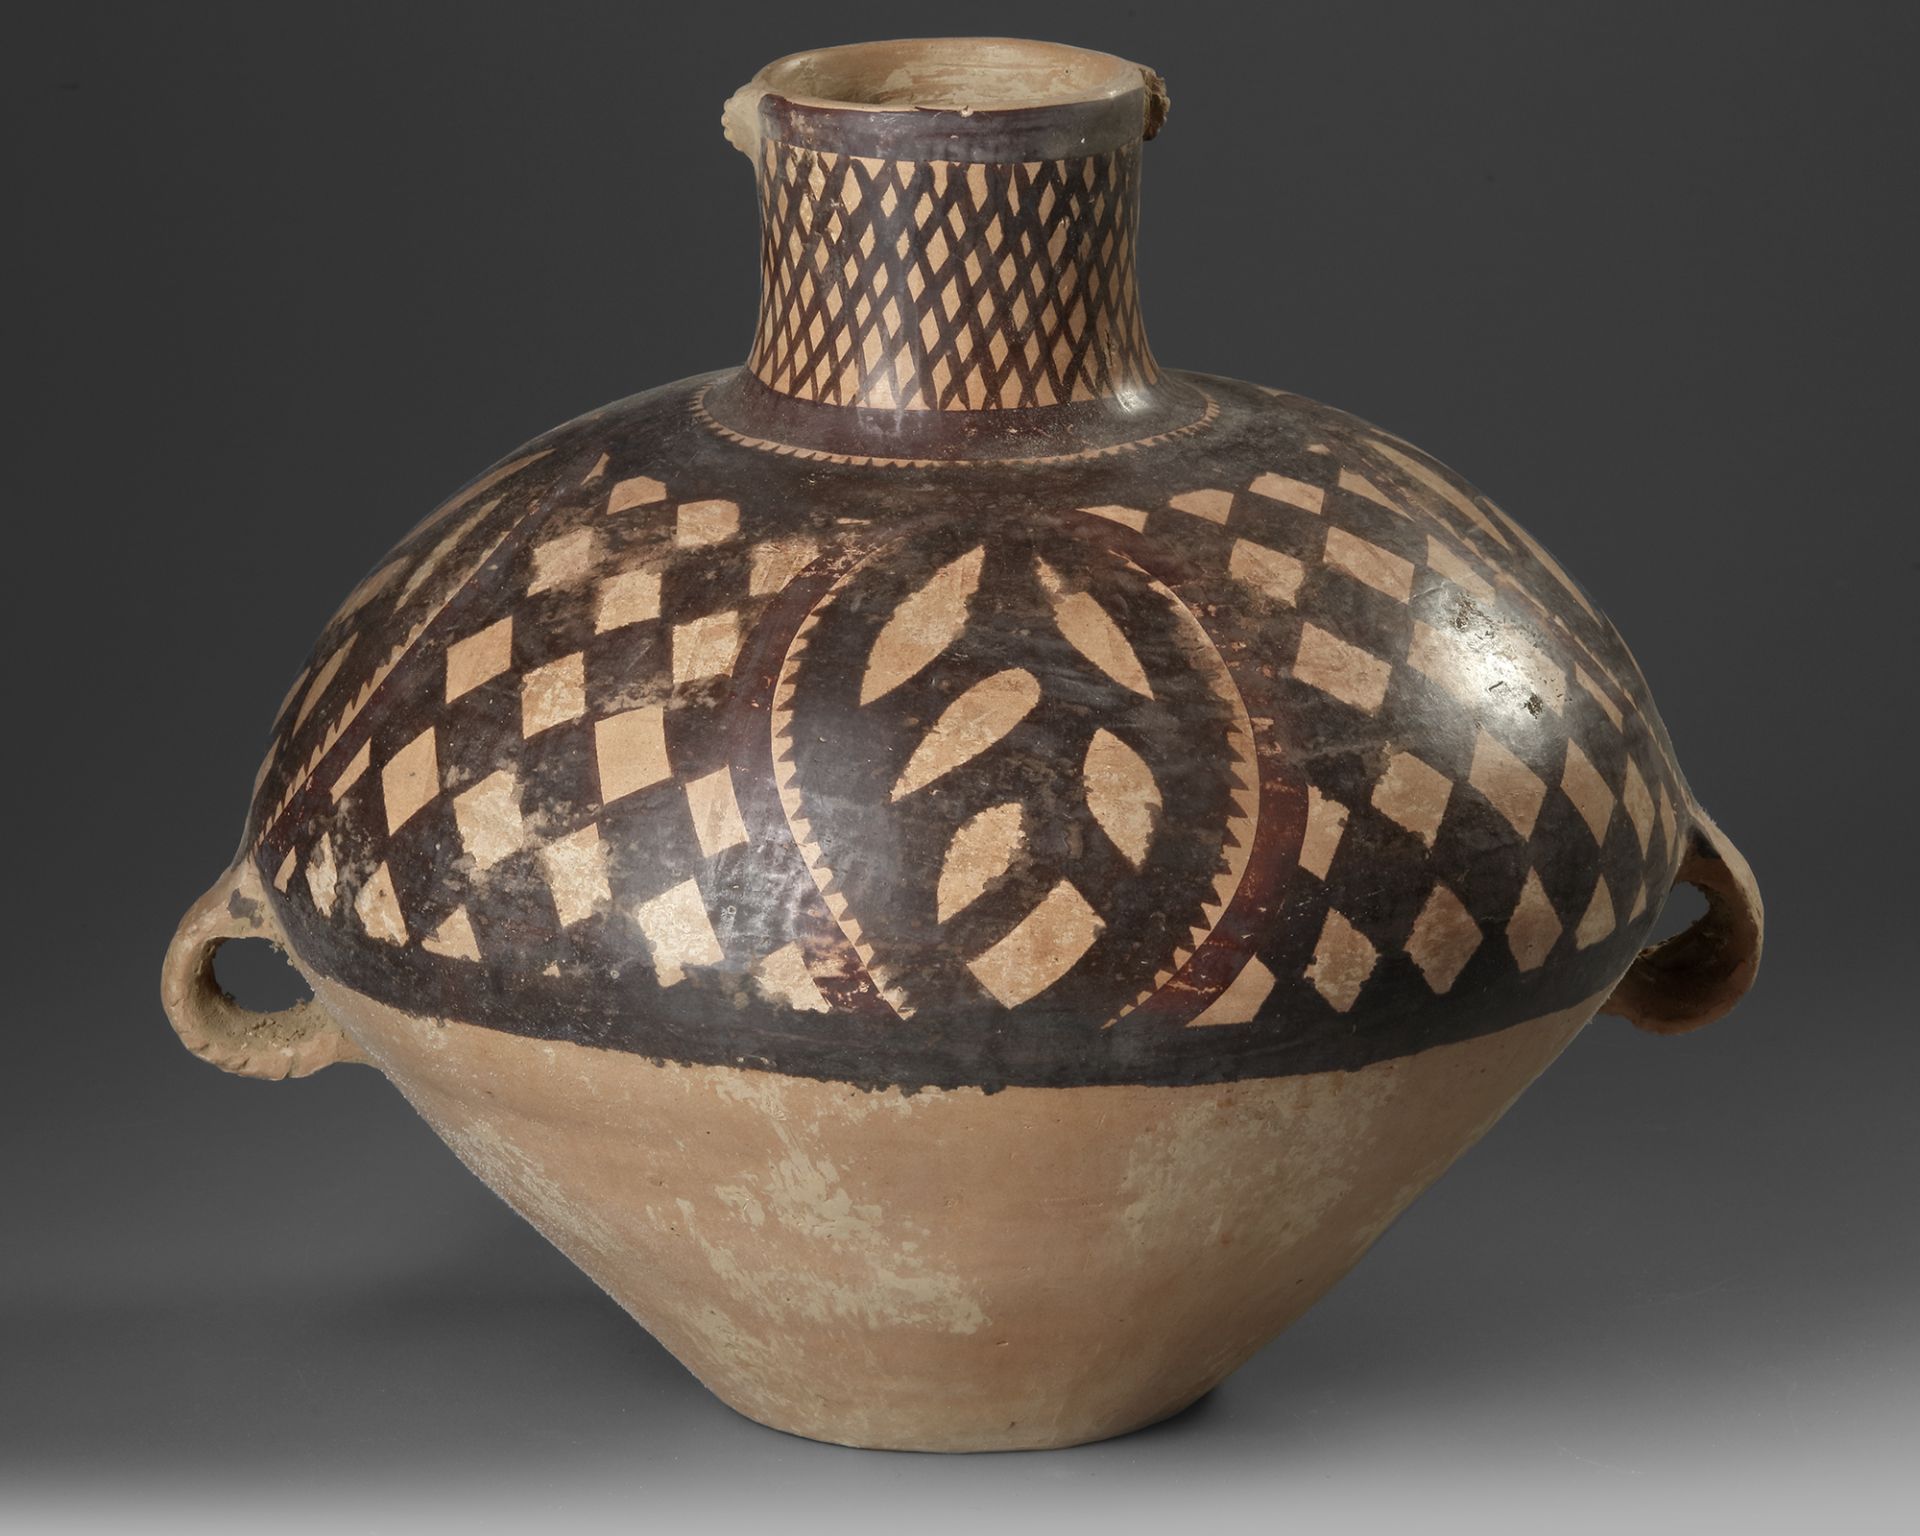 A CHINESE PAINTED POTTERY JAR, NEOLITHIC PERIOD, BANSHAN CULTURE GANSU PROVINCE, 3RD CENTURY - Image 2 of 3